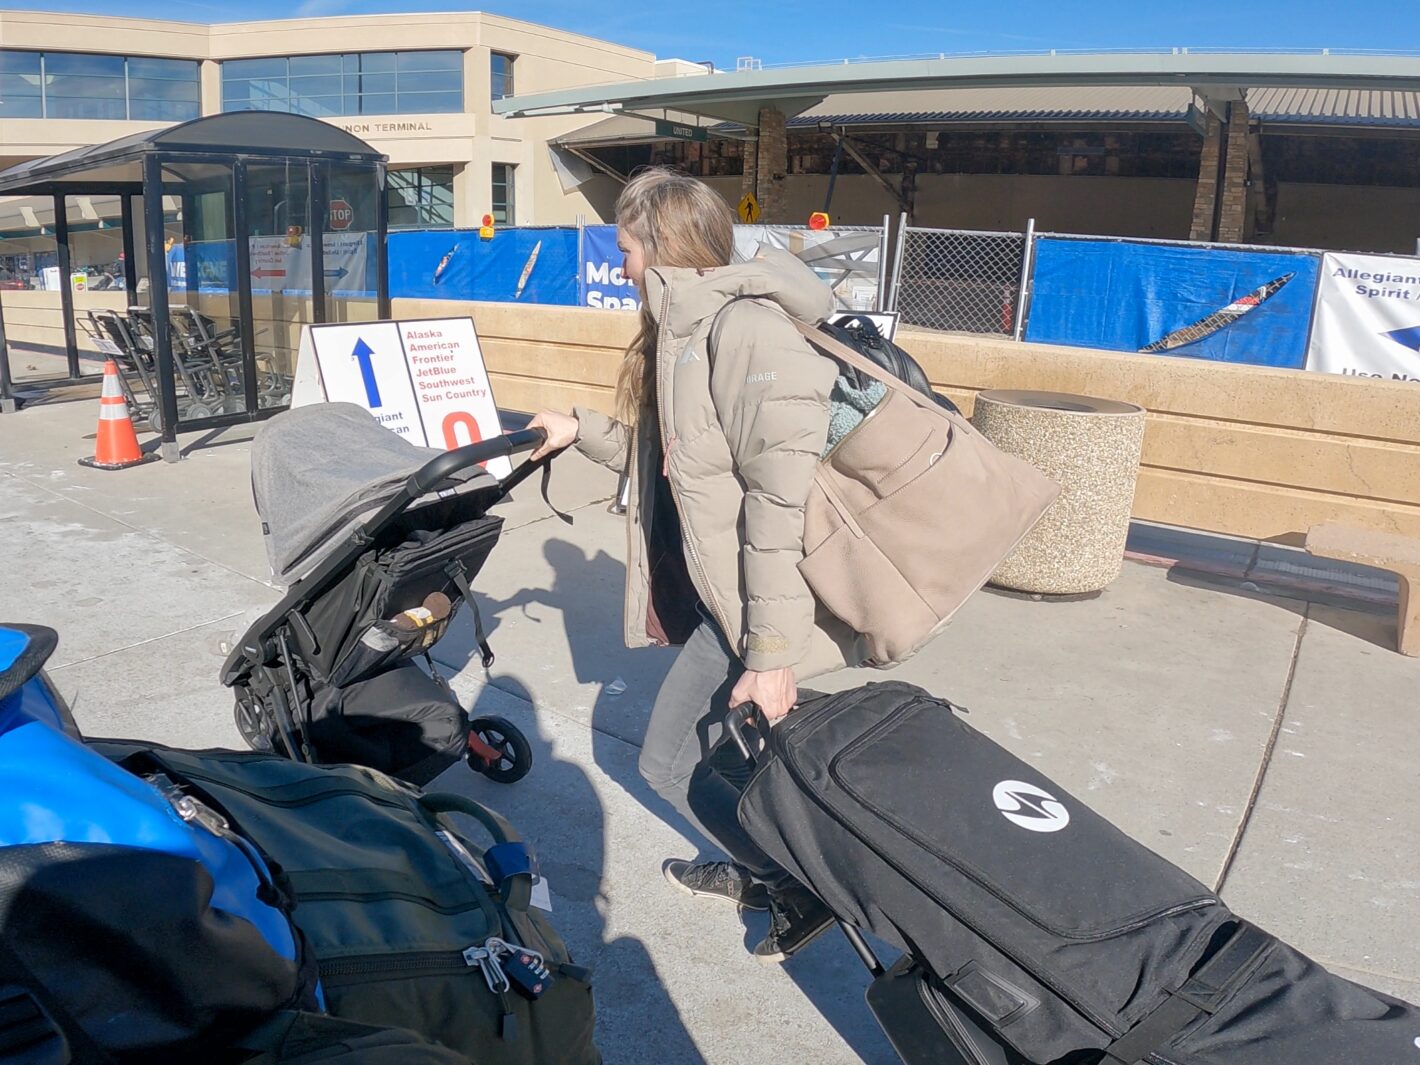 Elyse juggling multiple suitcases on the move